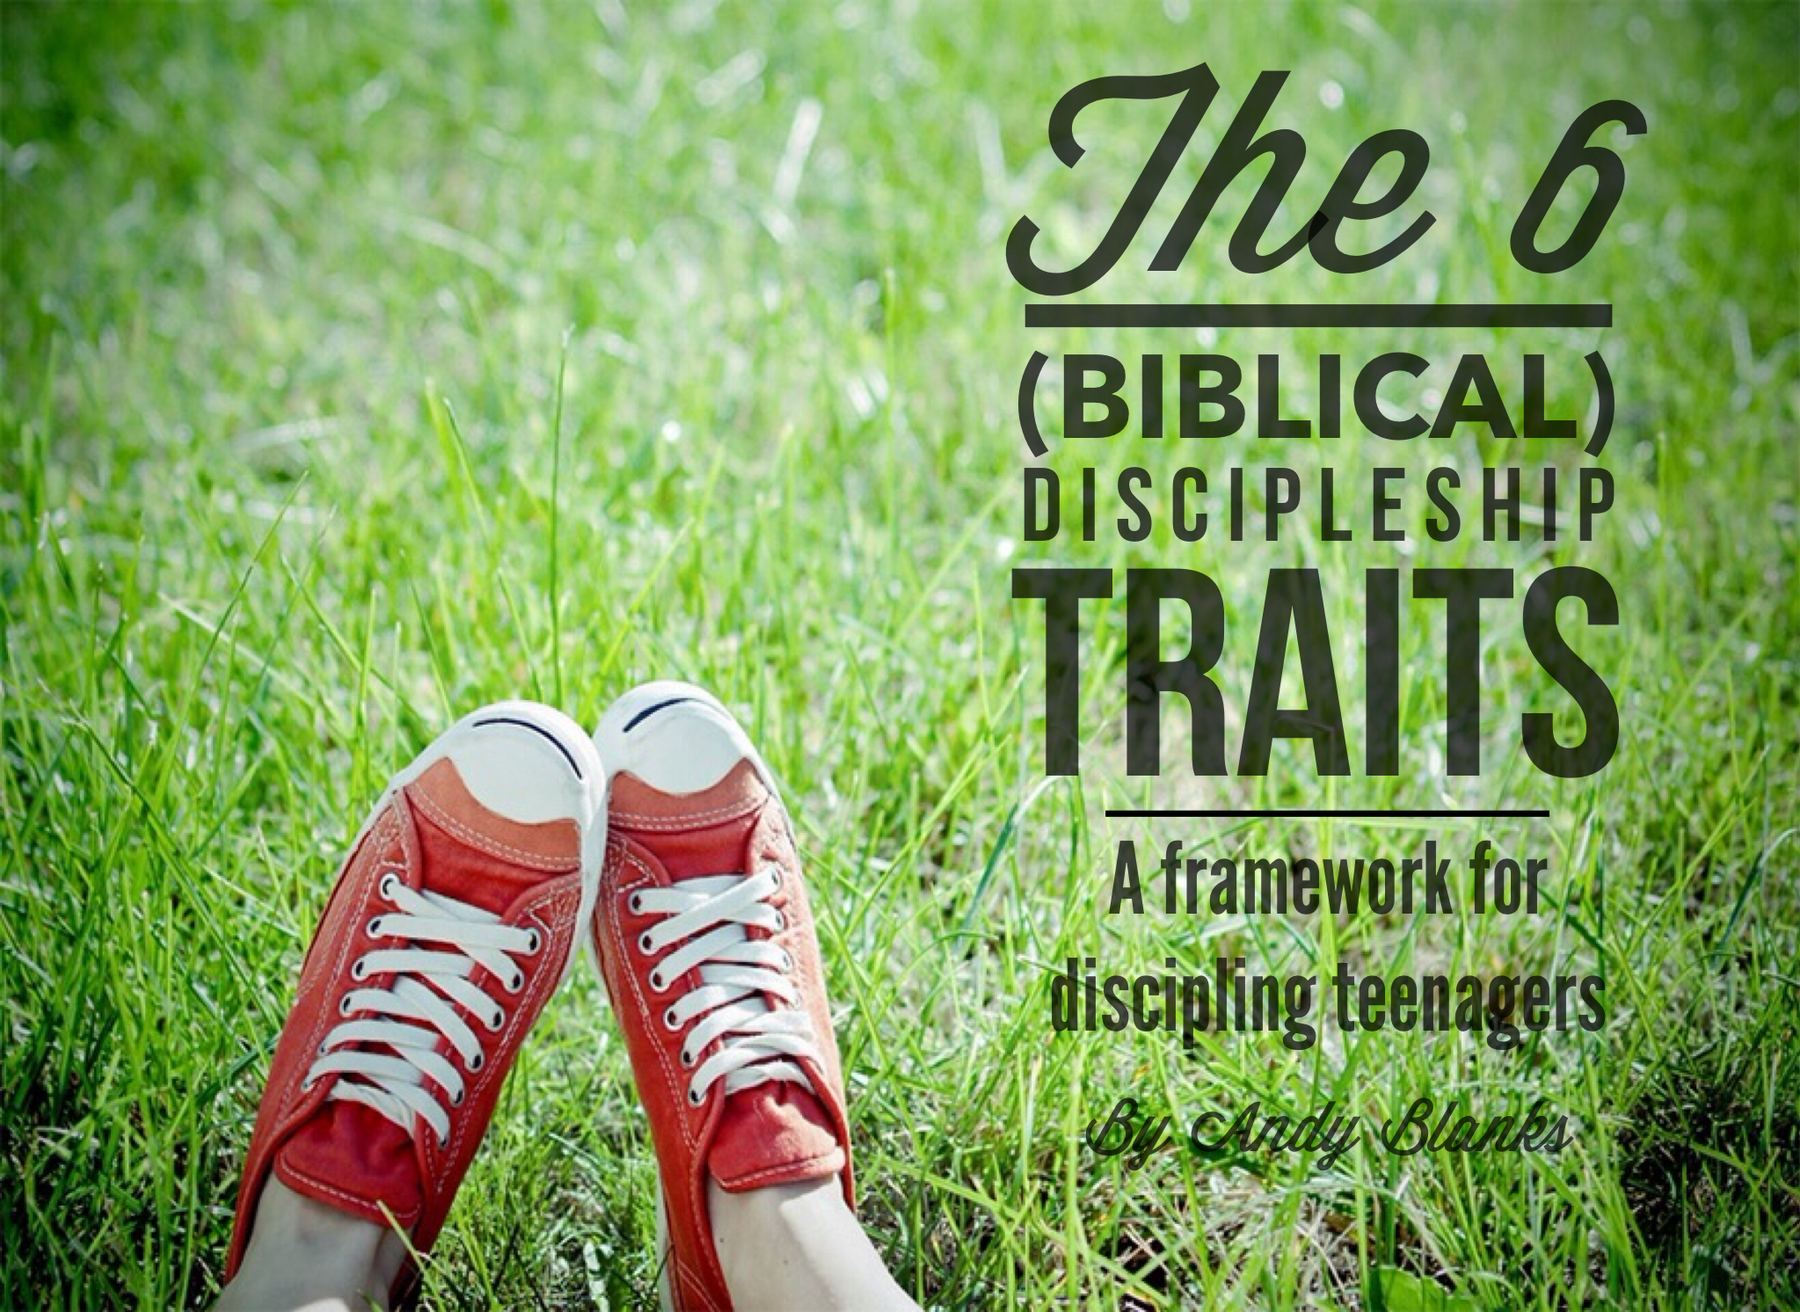 A Free Discipleship Framework For Your Youth Ministry